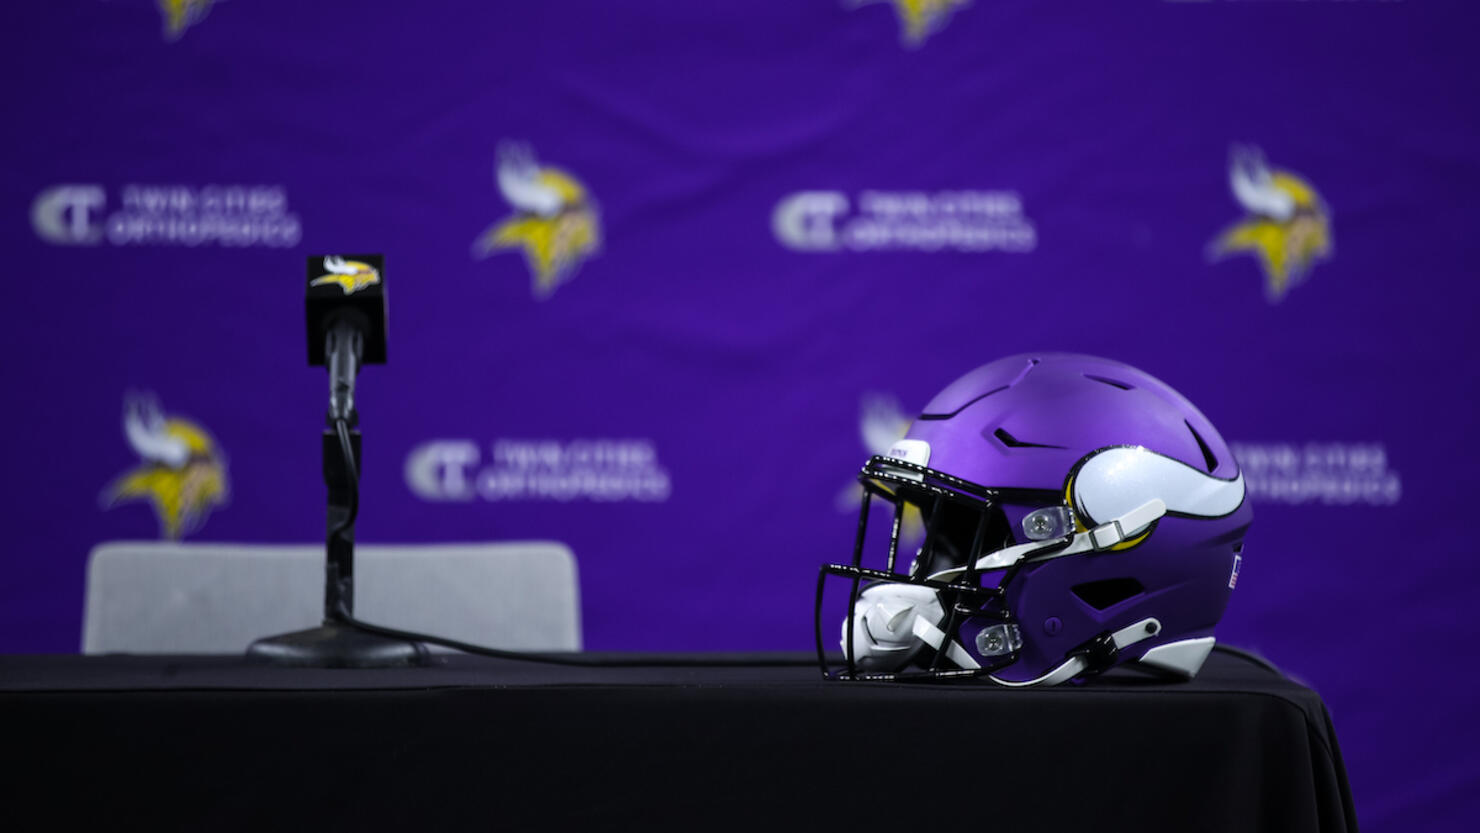 Minnesota Vikings Introduce Kevin O'Connell